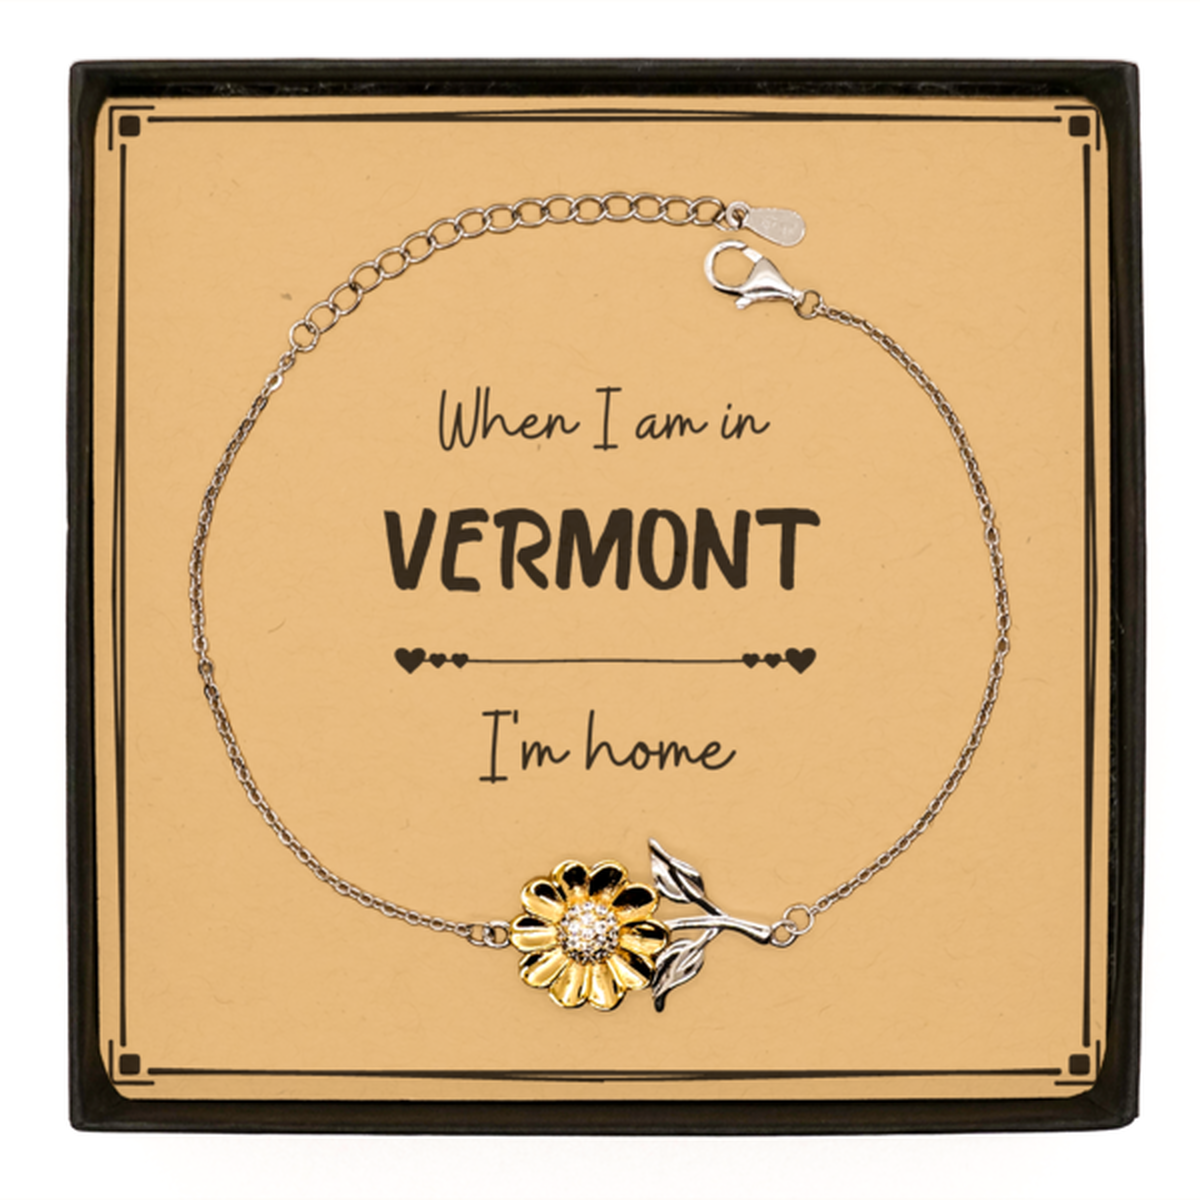 When I am in Vermont I'm home Sunflower Bracelet, Message Card Gifts For Vermont, State Vermont Birthday Gifts for Friends Coworker